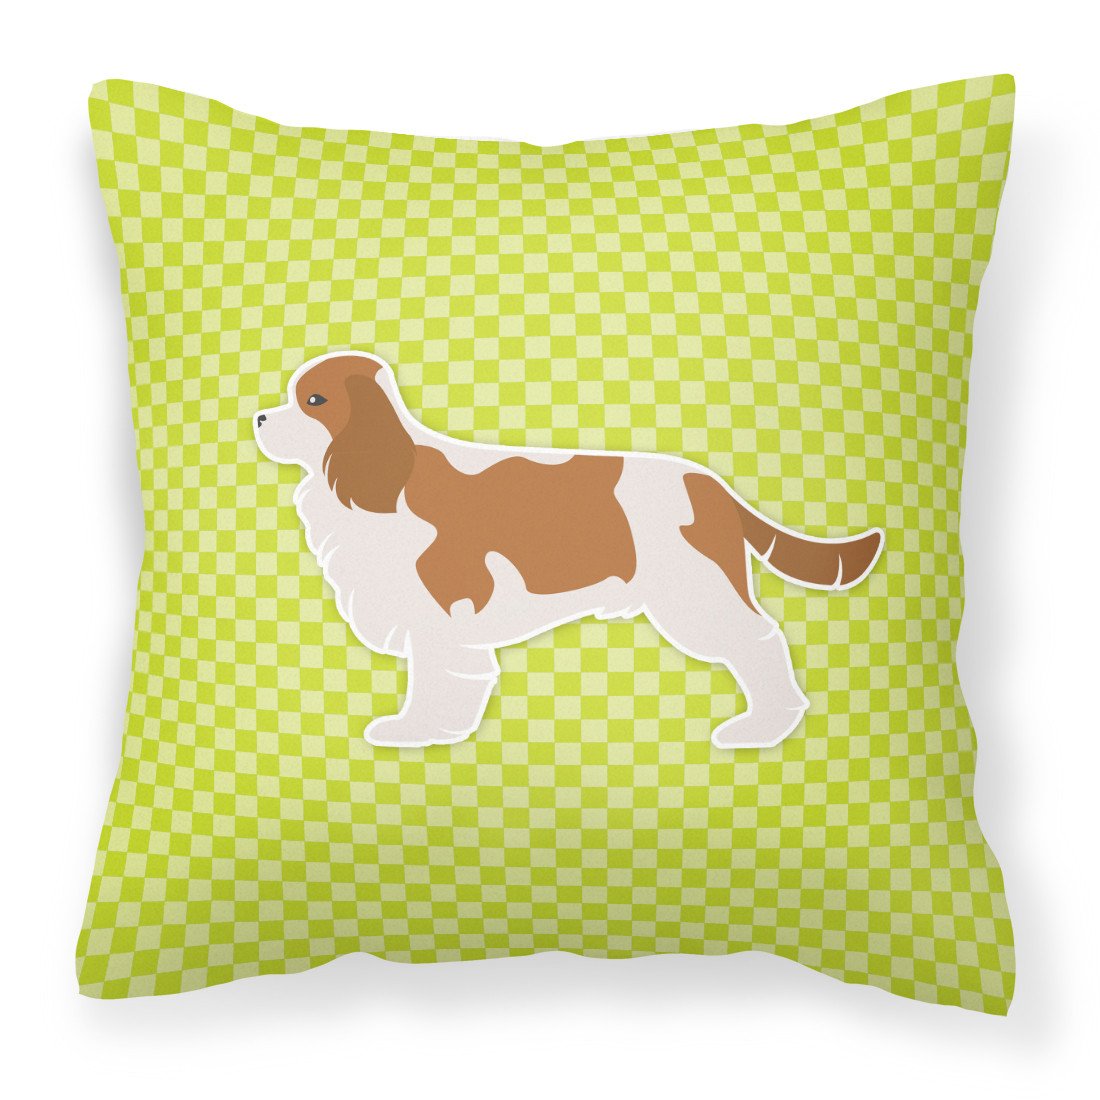 Cavalier King Charles Spaniel Checkerboard Green Fabric Decorative Pillow BB3849PW1818 by Caroline's Treasures